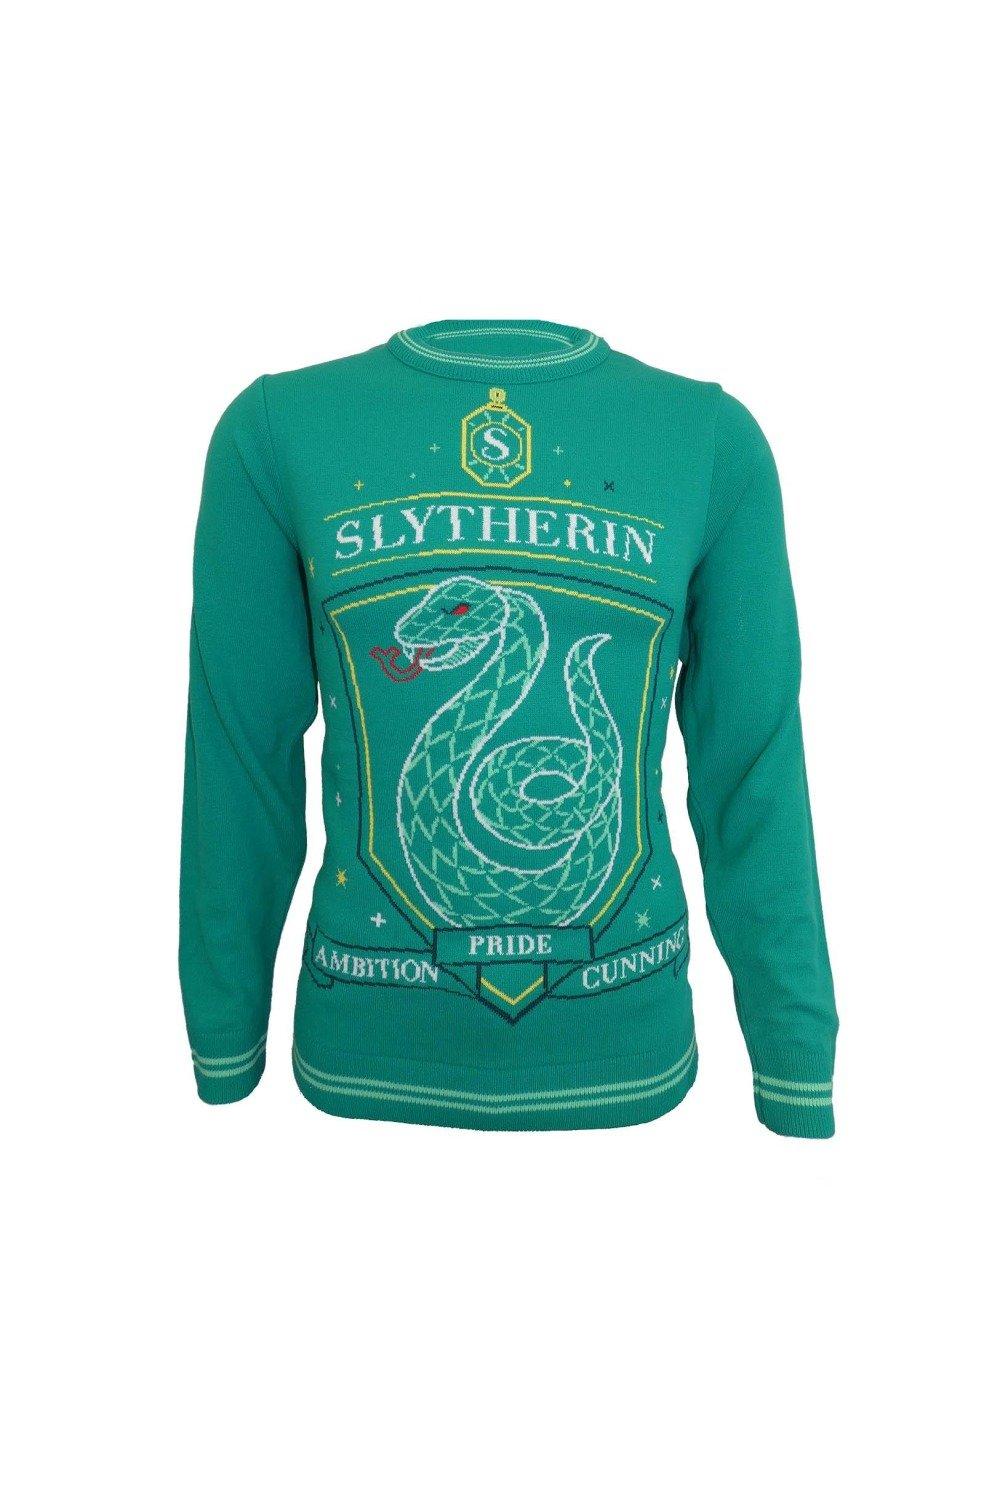 Slytherin Knitted Jumper